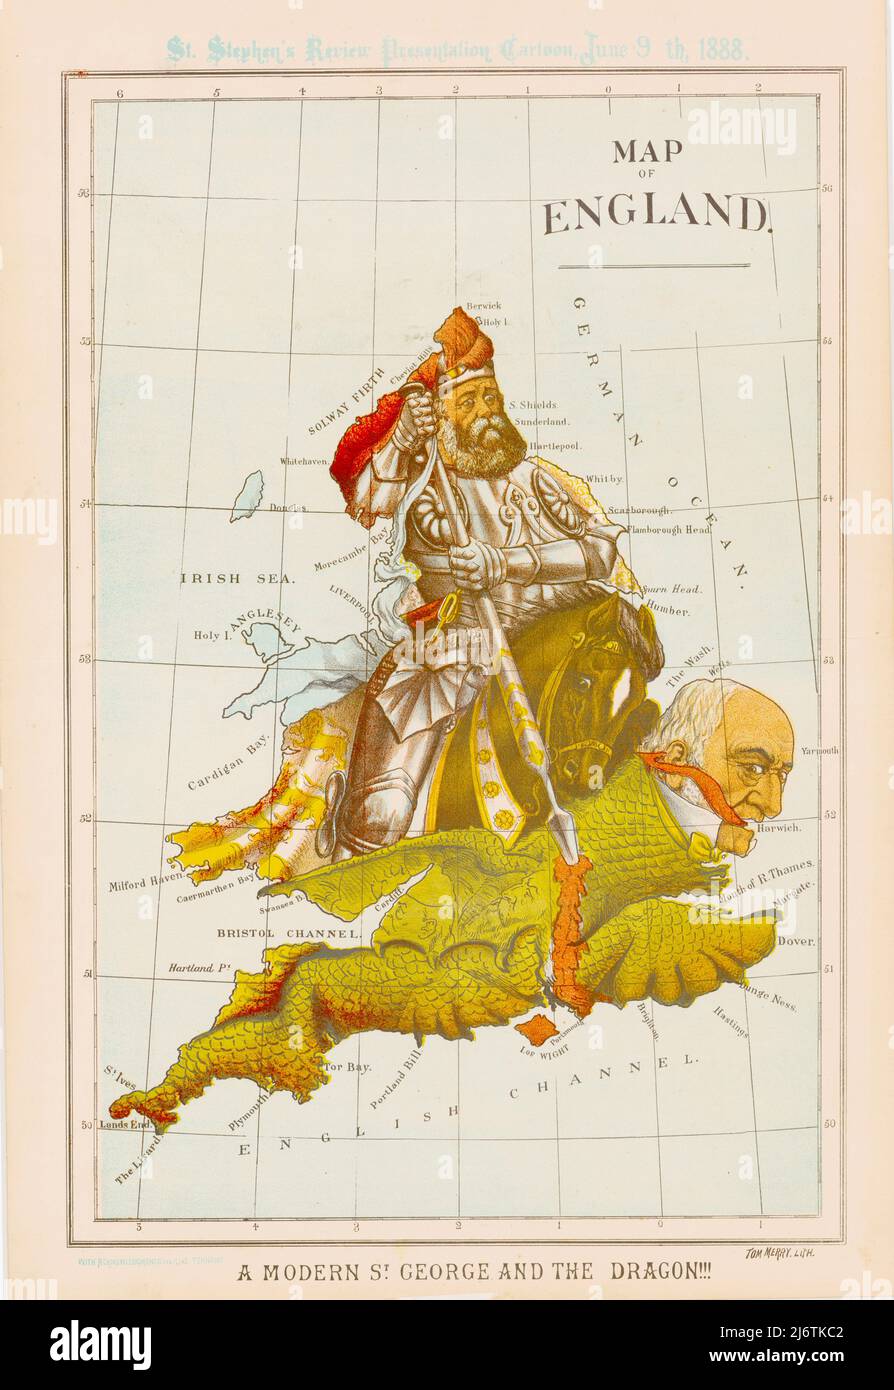 William Mecham Modern St George and the Dragon - Map of England - 1888 Stock Photo